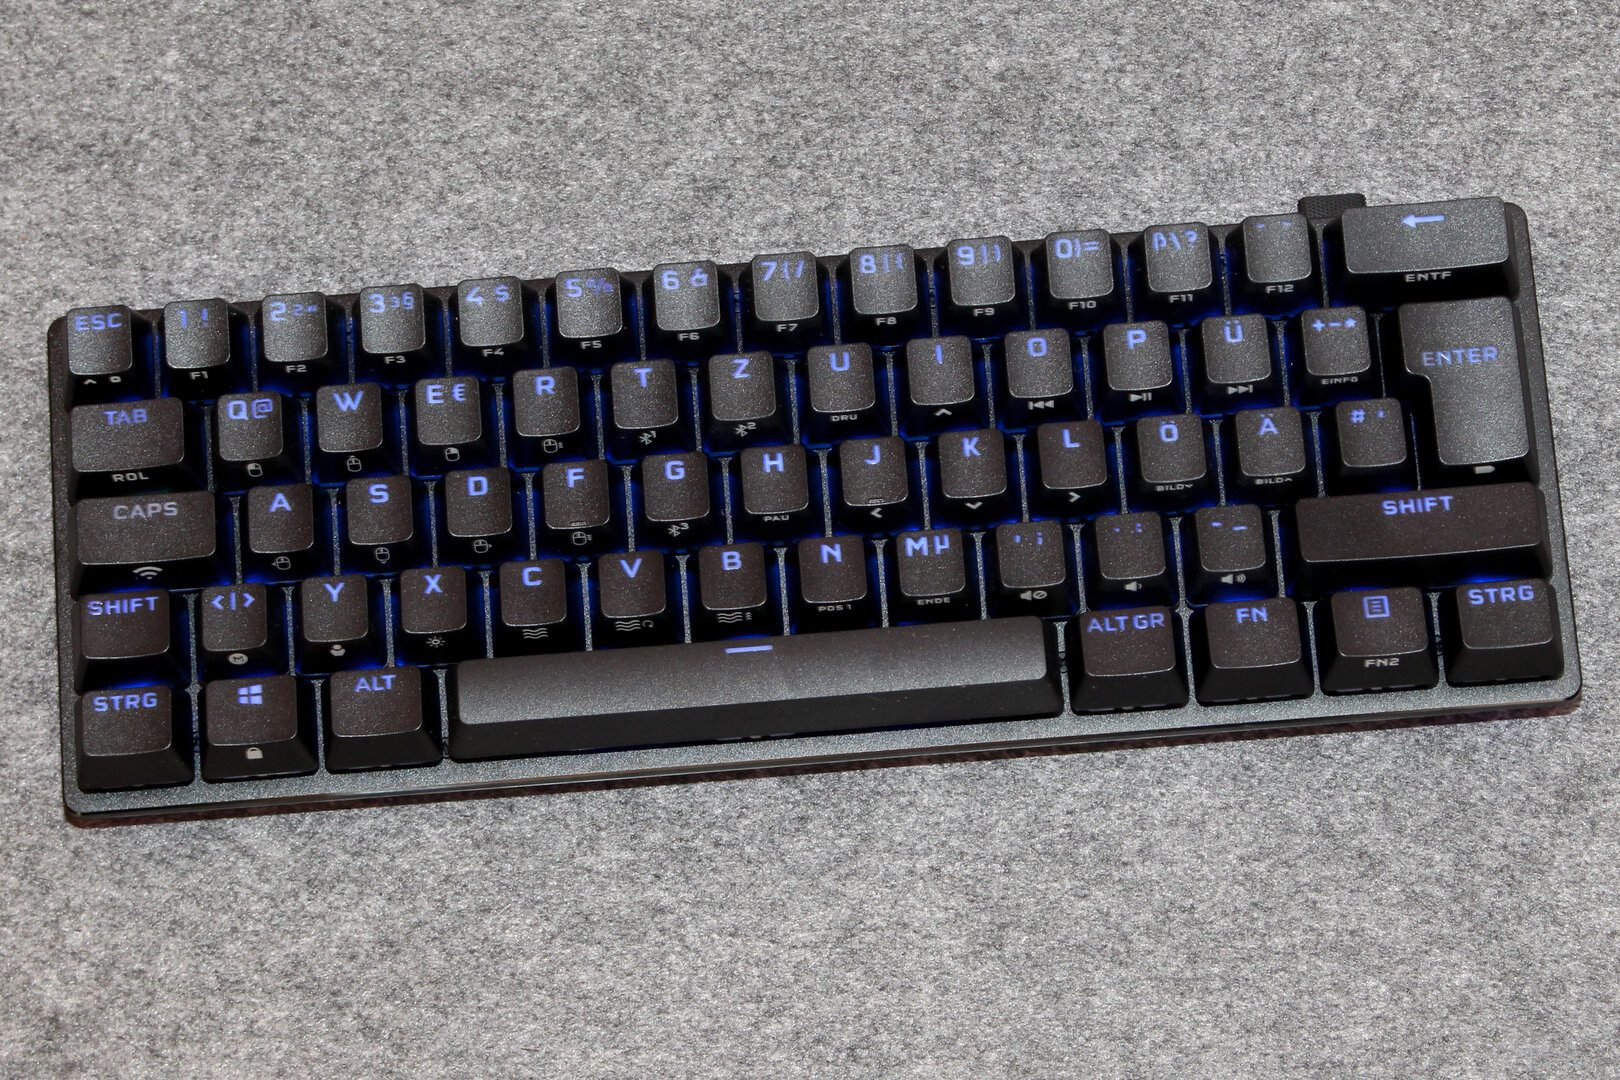 Corsair perfectly manages the lighting of the keys